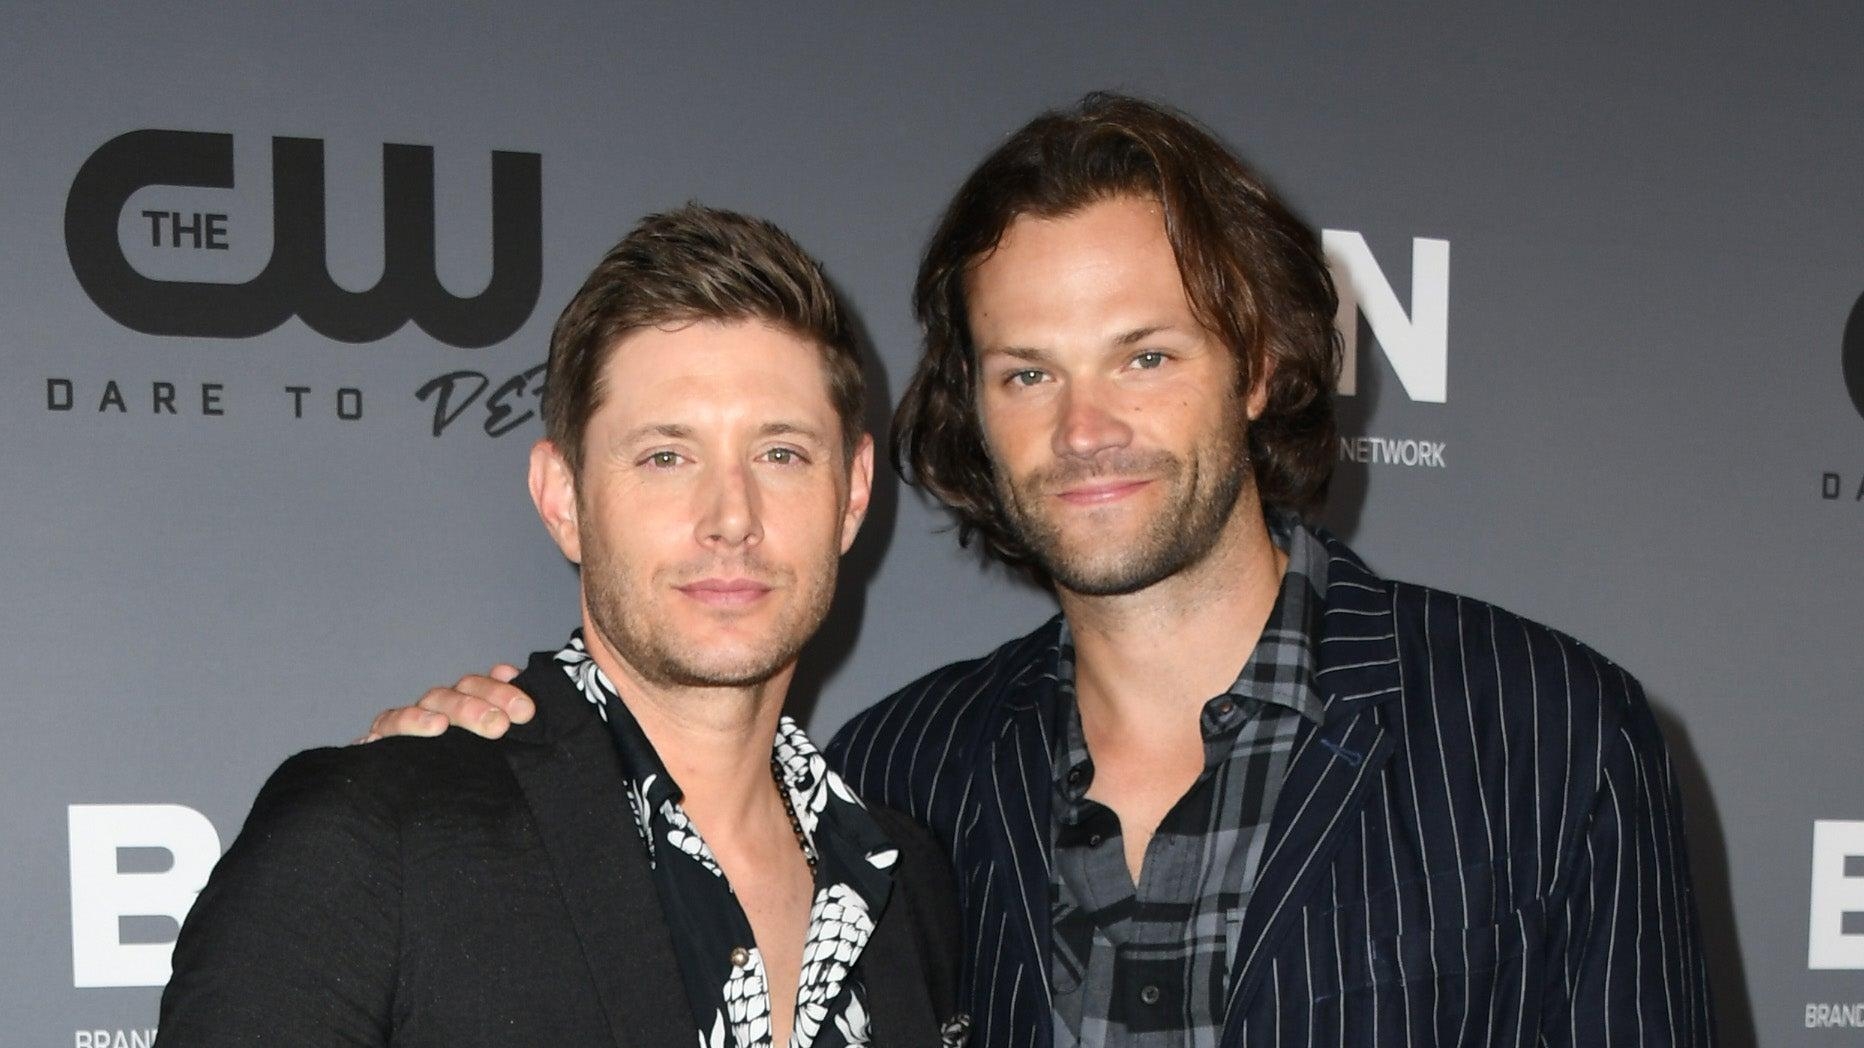 Jensen Ackles says his former Supernatural co-star Jared Padalecki is recovering after a “very bad” car accident